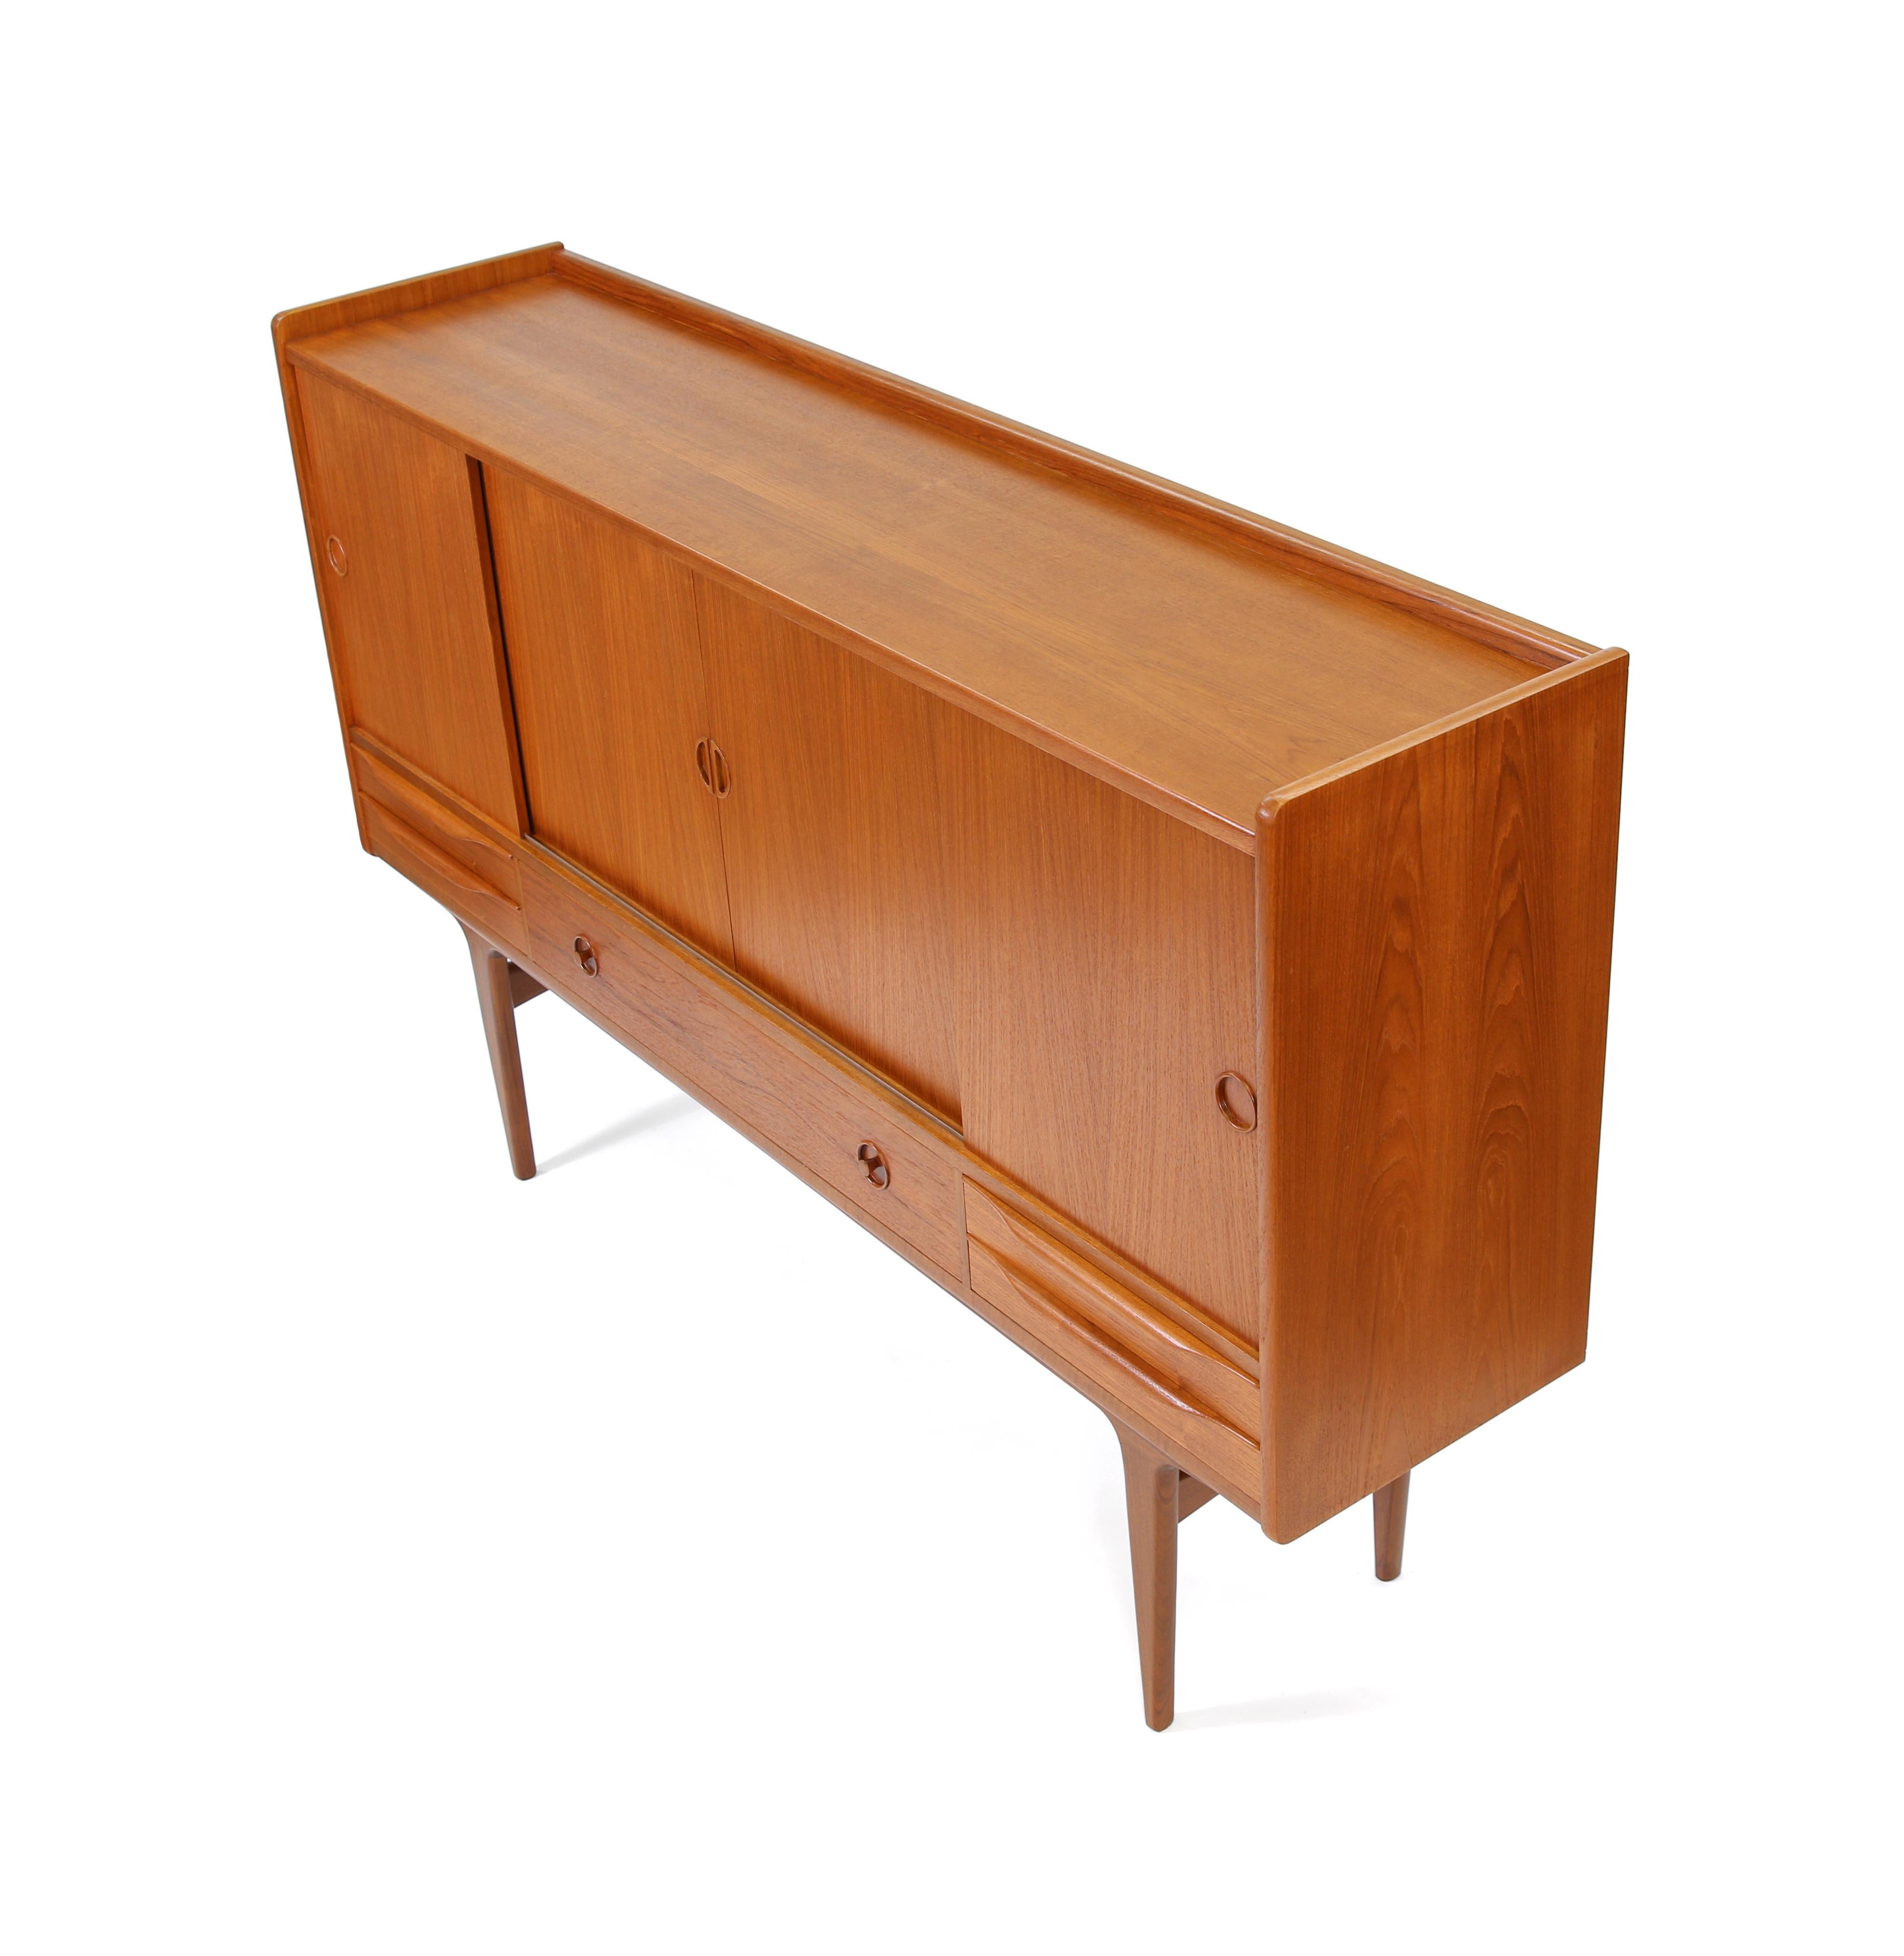 Johannes Andersen Attributed Danish Mid Century teak highboard credenza

A very nice Danish mid-century teak highboard credenza recently imported from Denmark. Refined design with a variety of pull styles on the sliding doors and lower drawers.